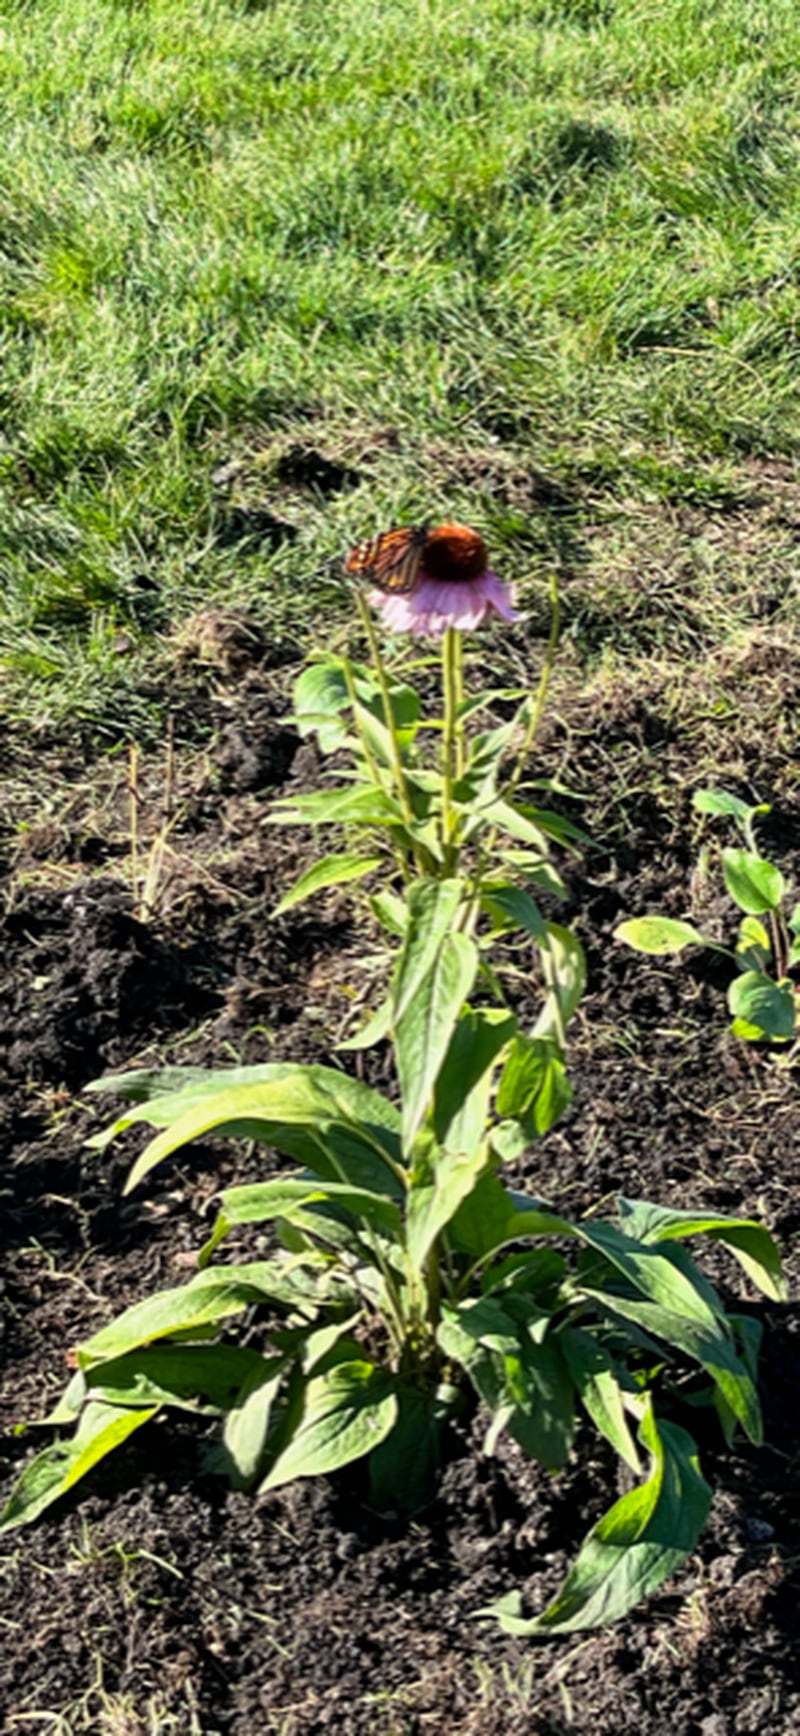 A monarch butterfly landed Saturday, Oct. 21, 2023, on one of the first flowers planted in the demonstration garden for the Pollinator Park at Rotary Park in La Salle.